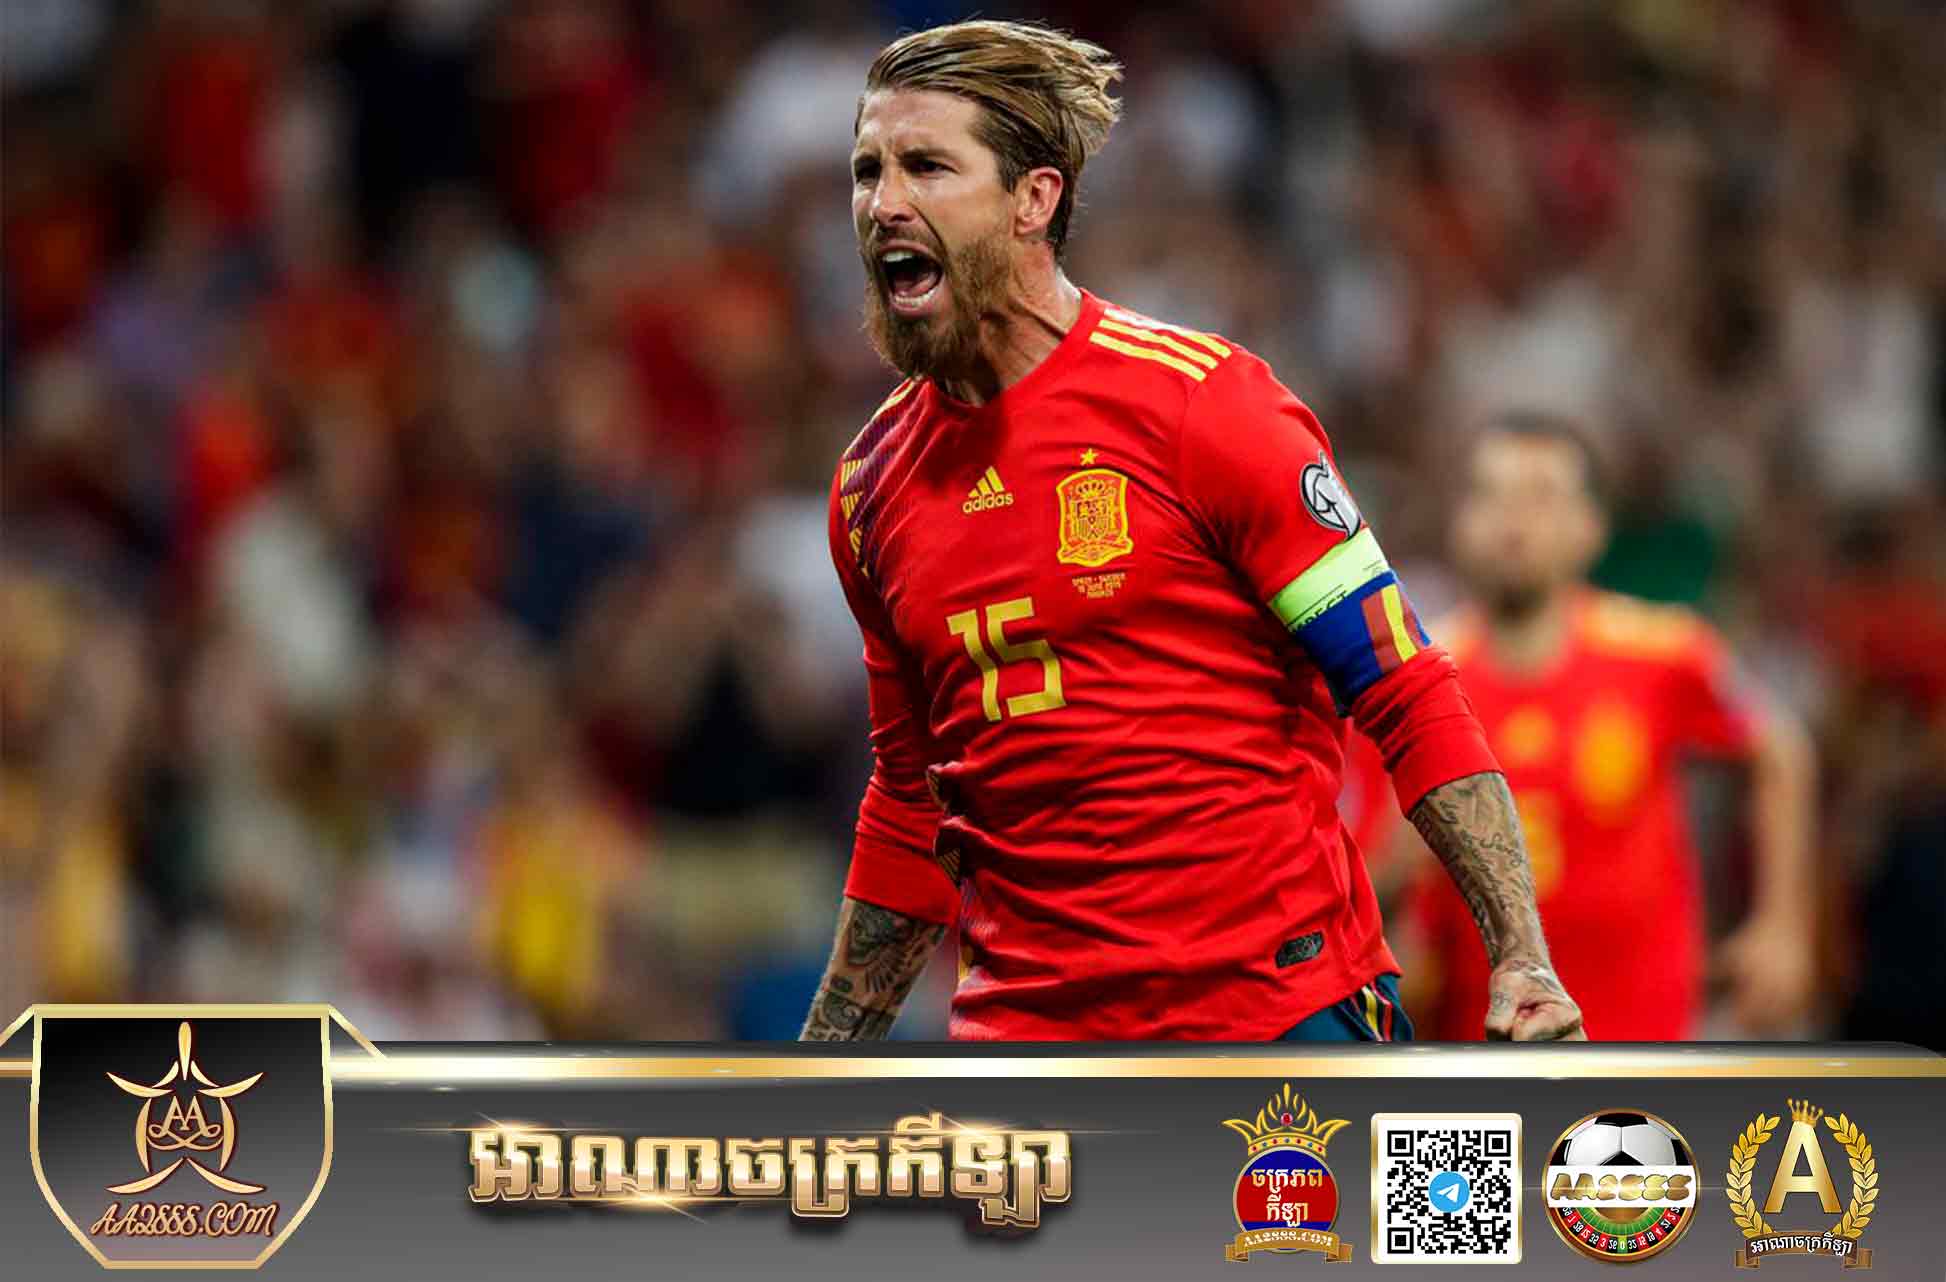 Ramos is not called up for Spain national team